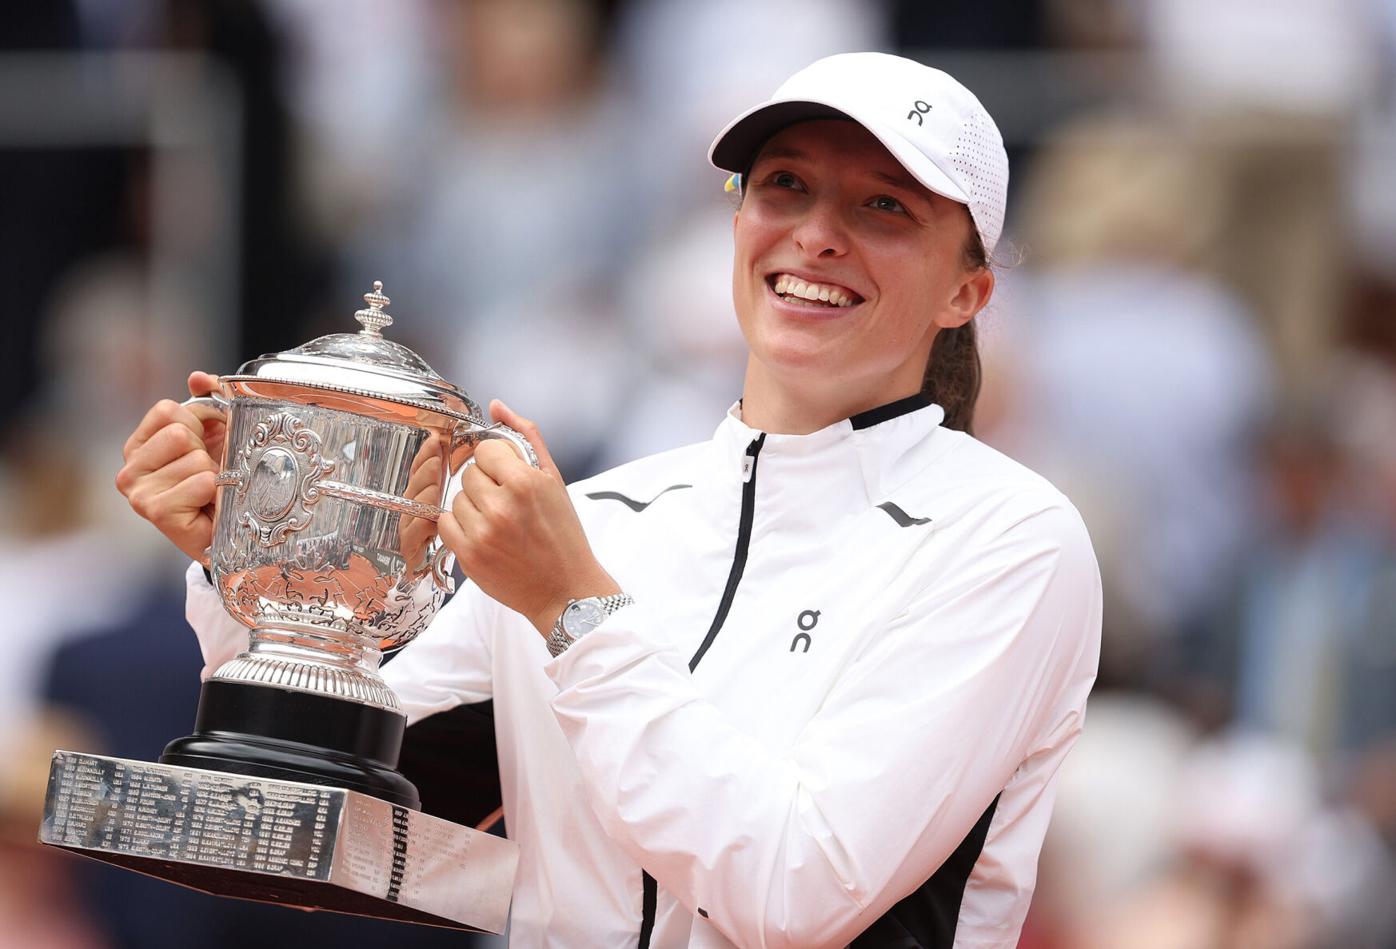 French Open: Iga Swiatek wins title, but drops trophy lid at Roland Garros